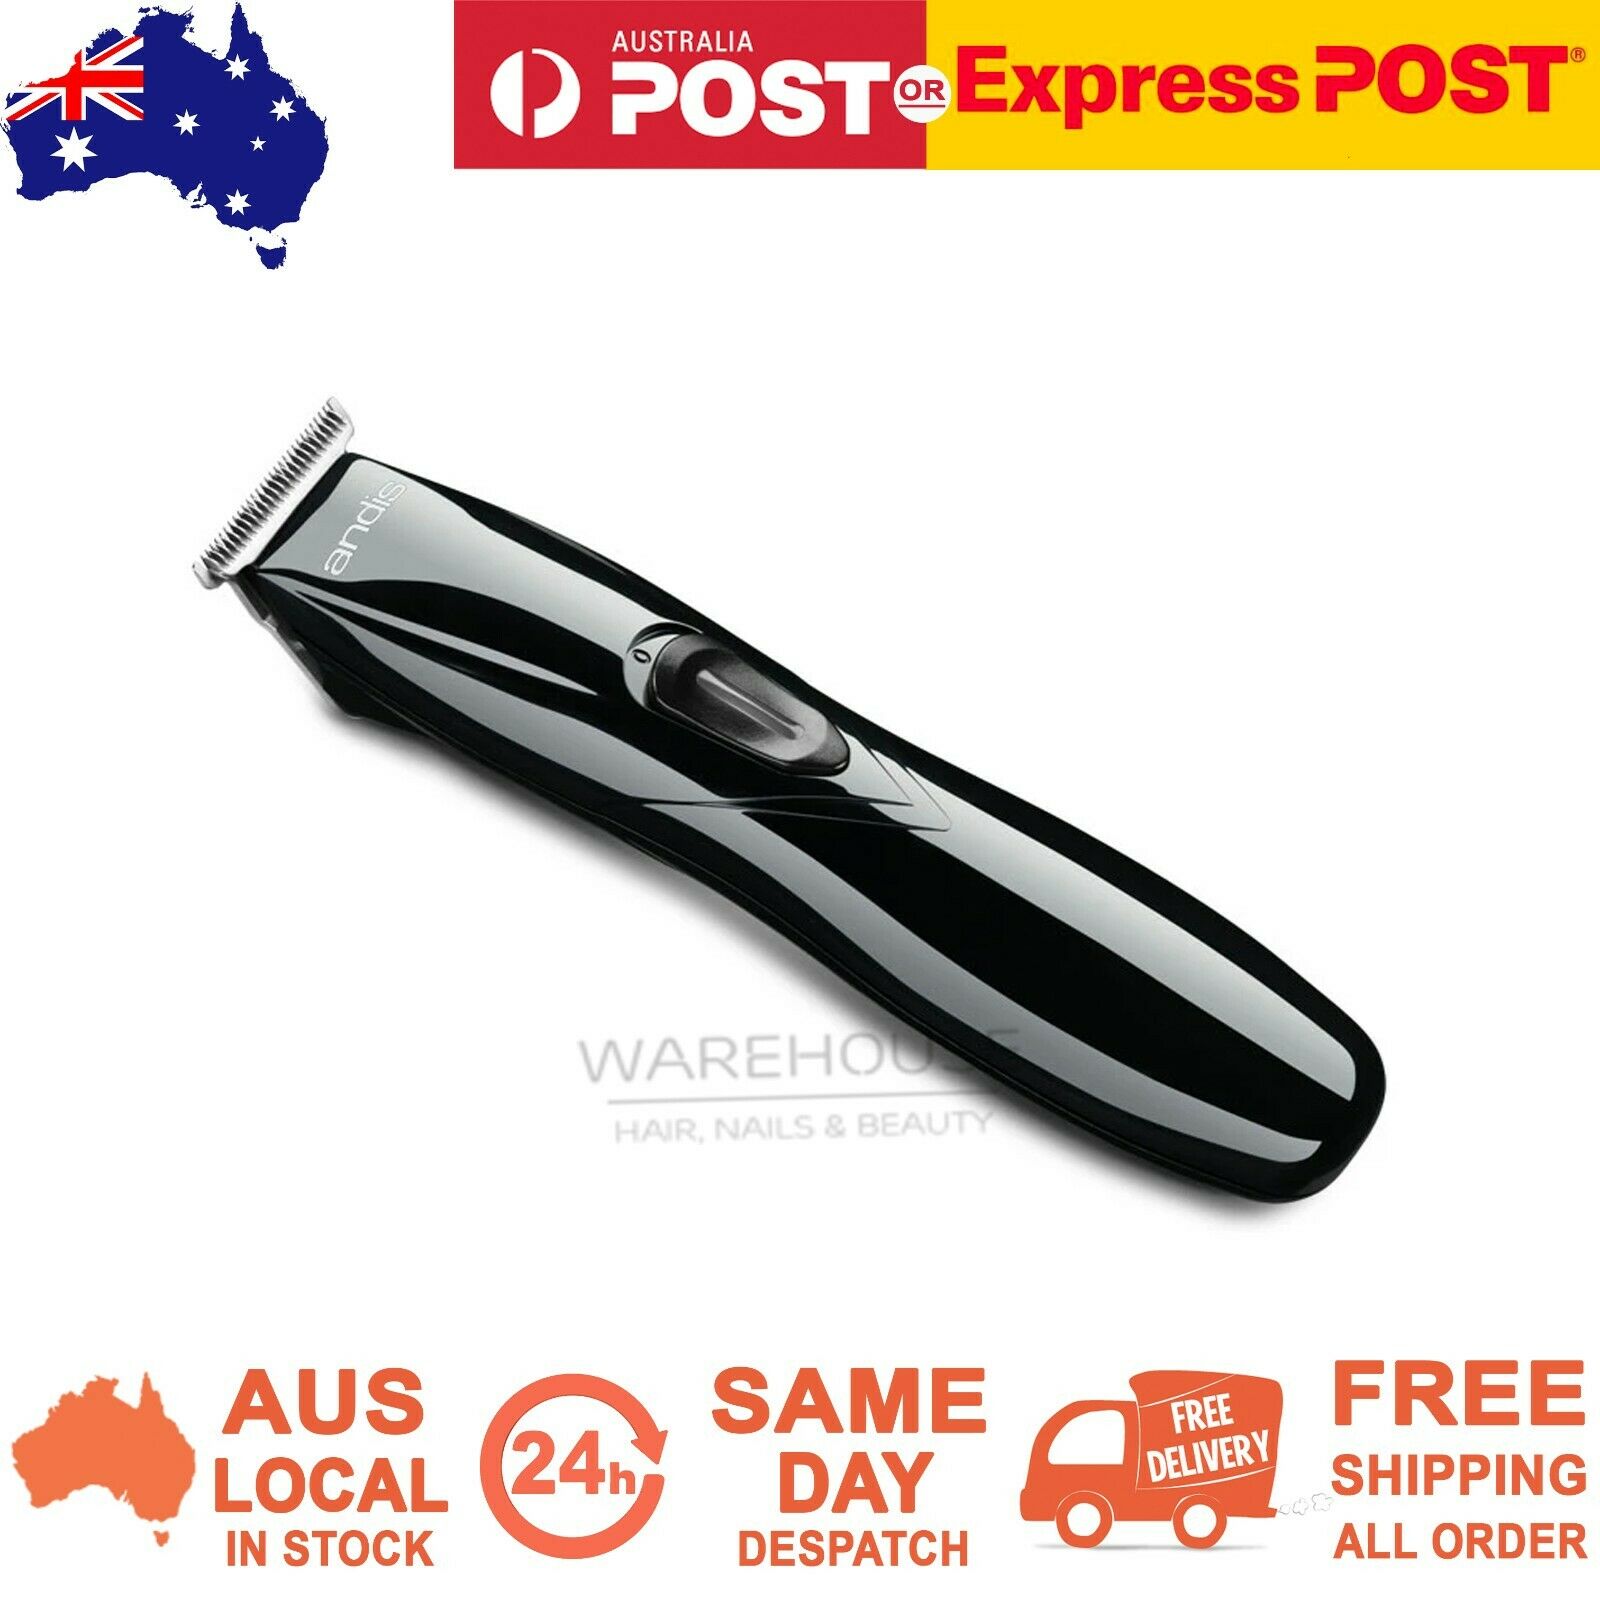 andis cordless beard trimmer